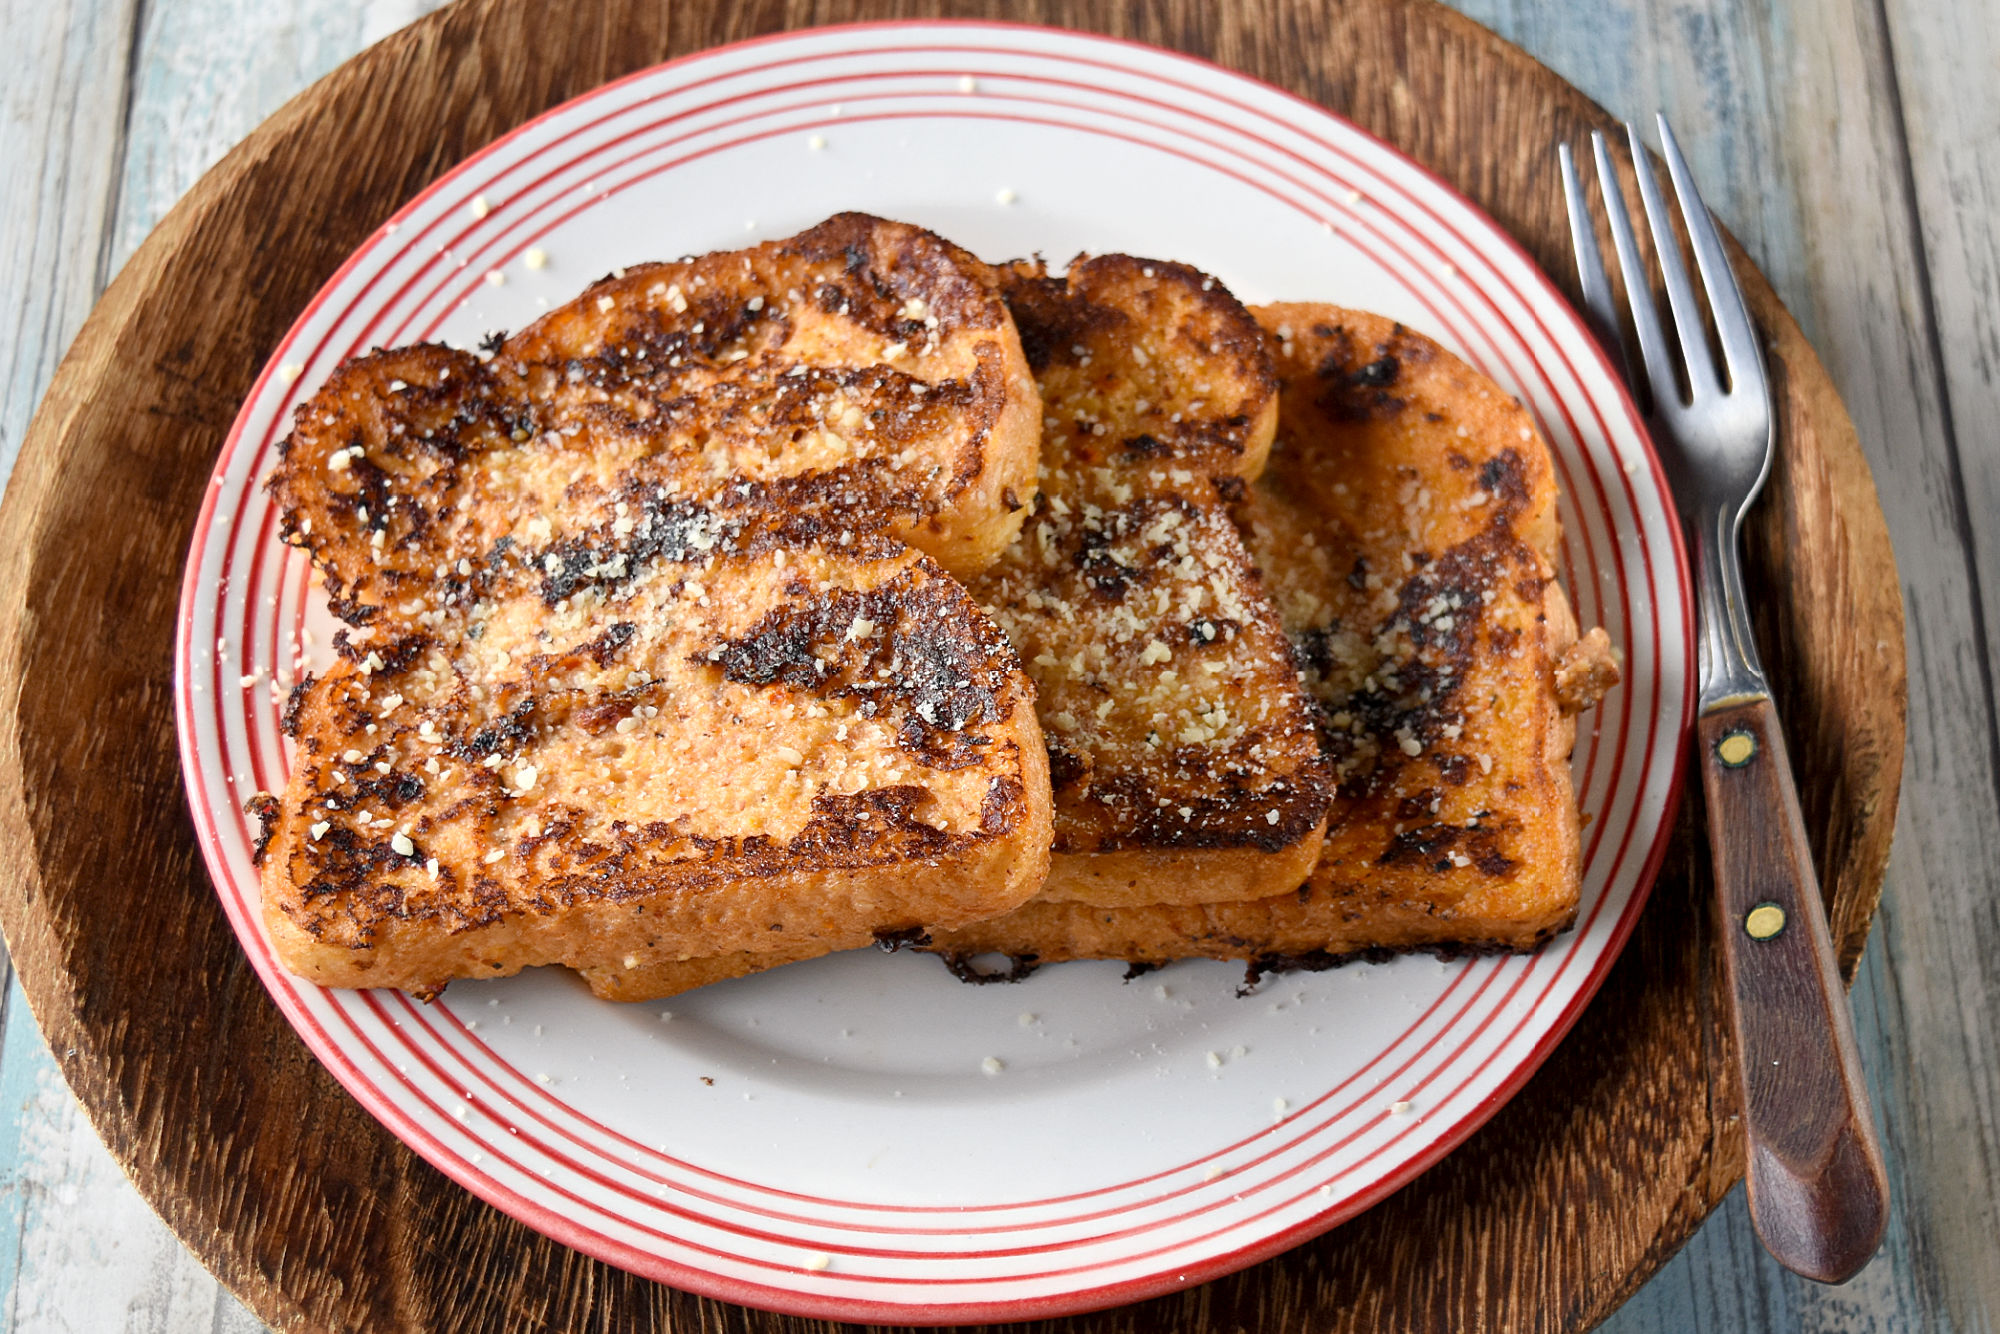 Tomato Pesto French Toast is a savory and delicious French toast with tangy tomato pesto flavor.  You can either make the pesto or use premade pesto for this fun twist on the breakfast classic. #OurFamilyTable #Frenchtoast #tomatopesto #savoryFrenchtoast